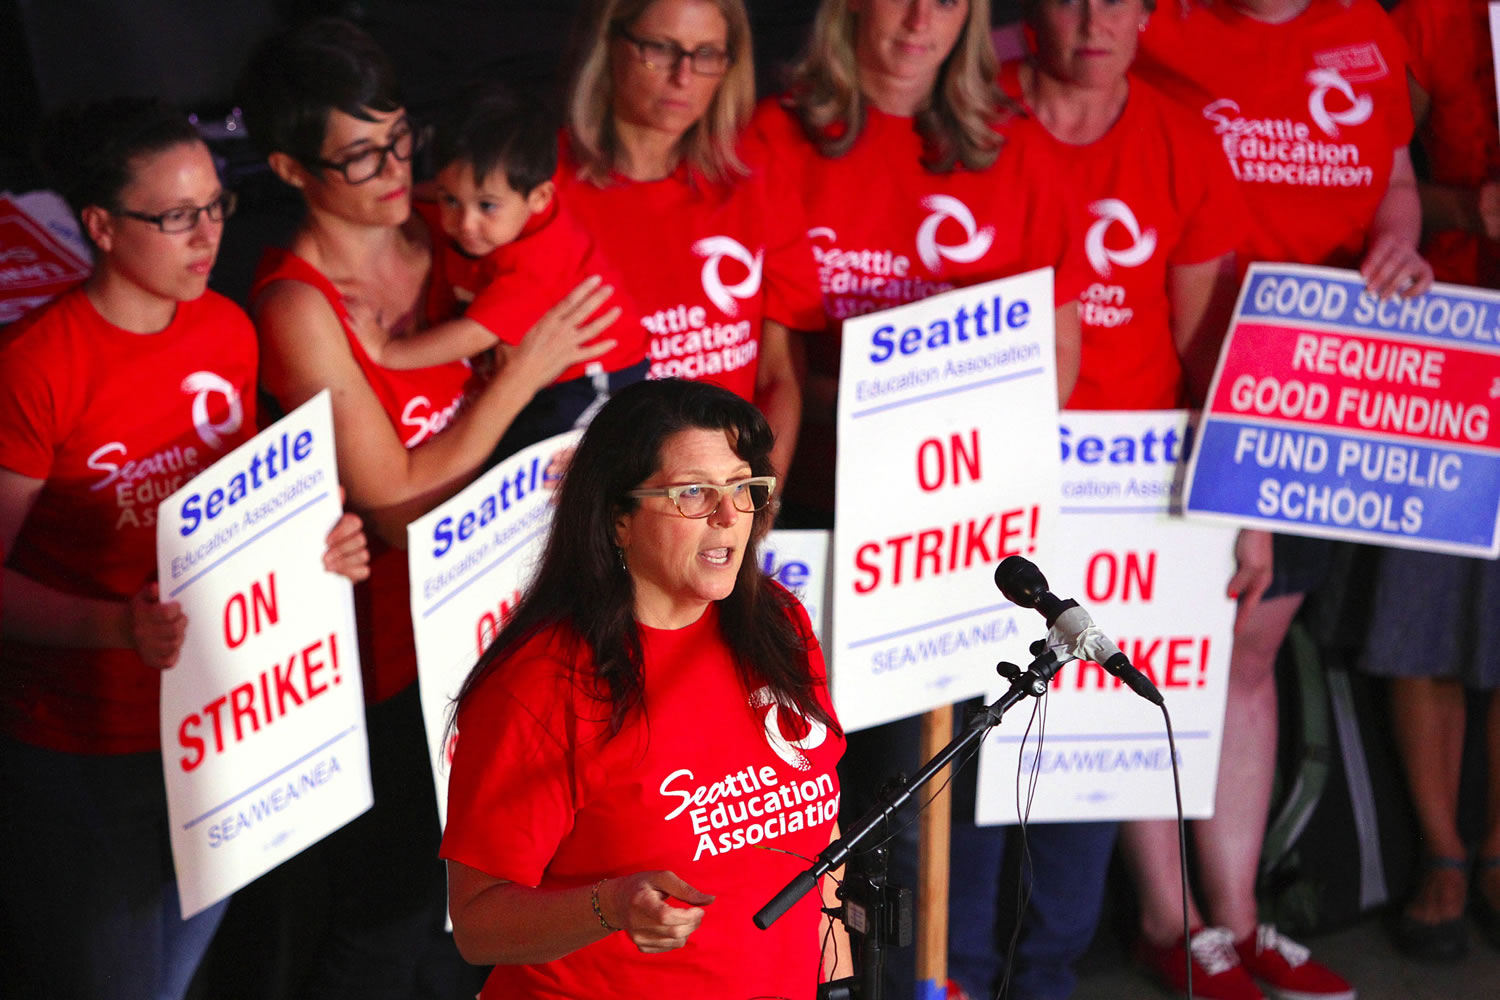 Phyllis Campano, vice president of the Seattle Education Association, addresses the media during an update of negotiations Sunday, Sept. 13, 2015, in Seattle. Seattle Public Schools is canceling classes for a fourth day Monday as a strike by teachers enters its second week.